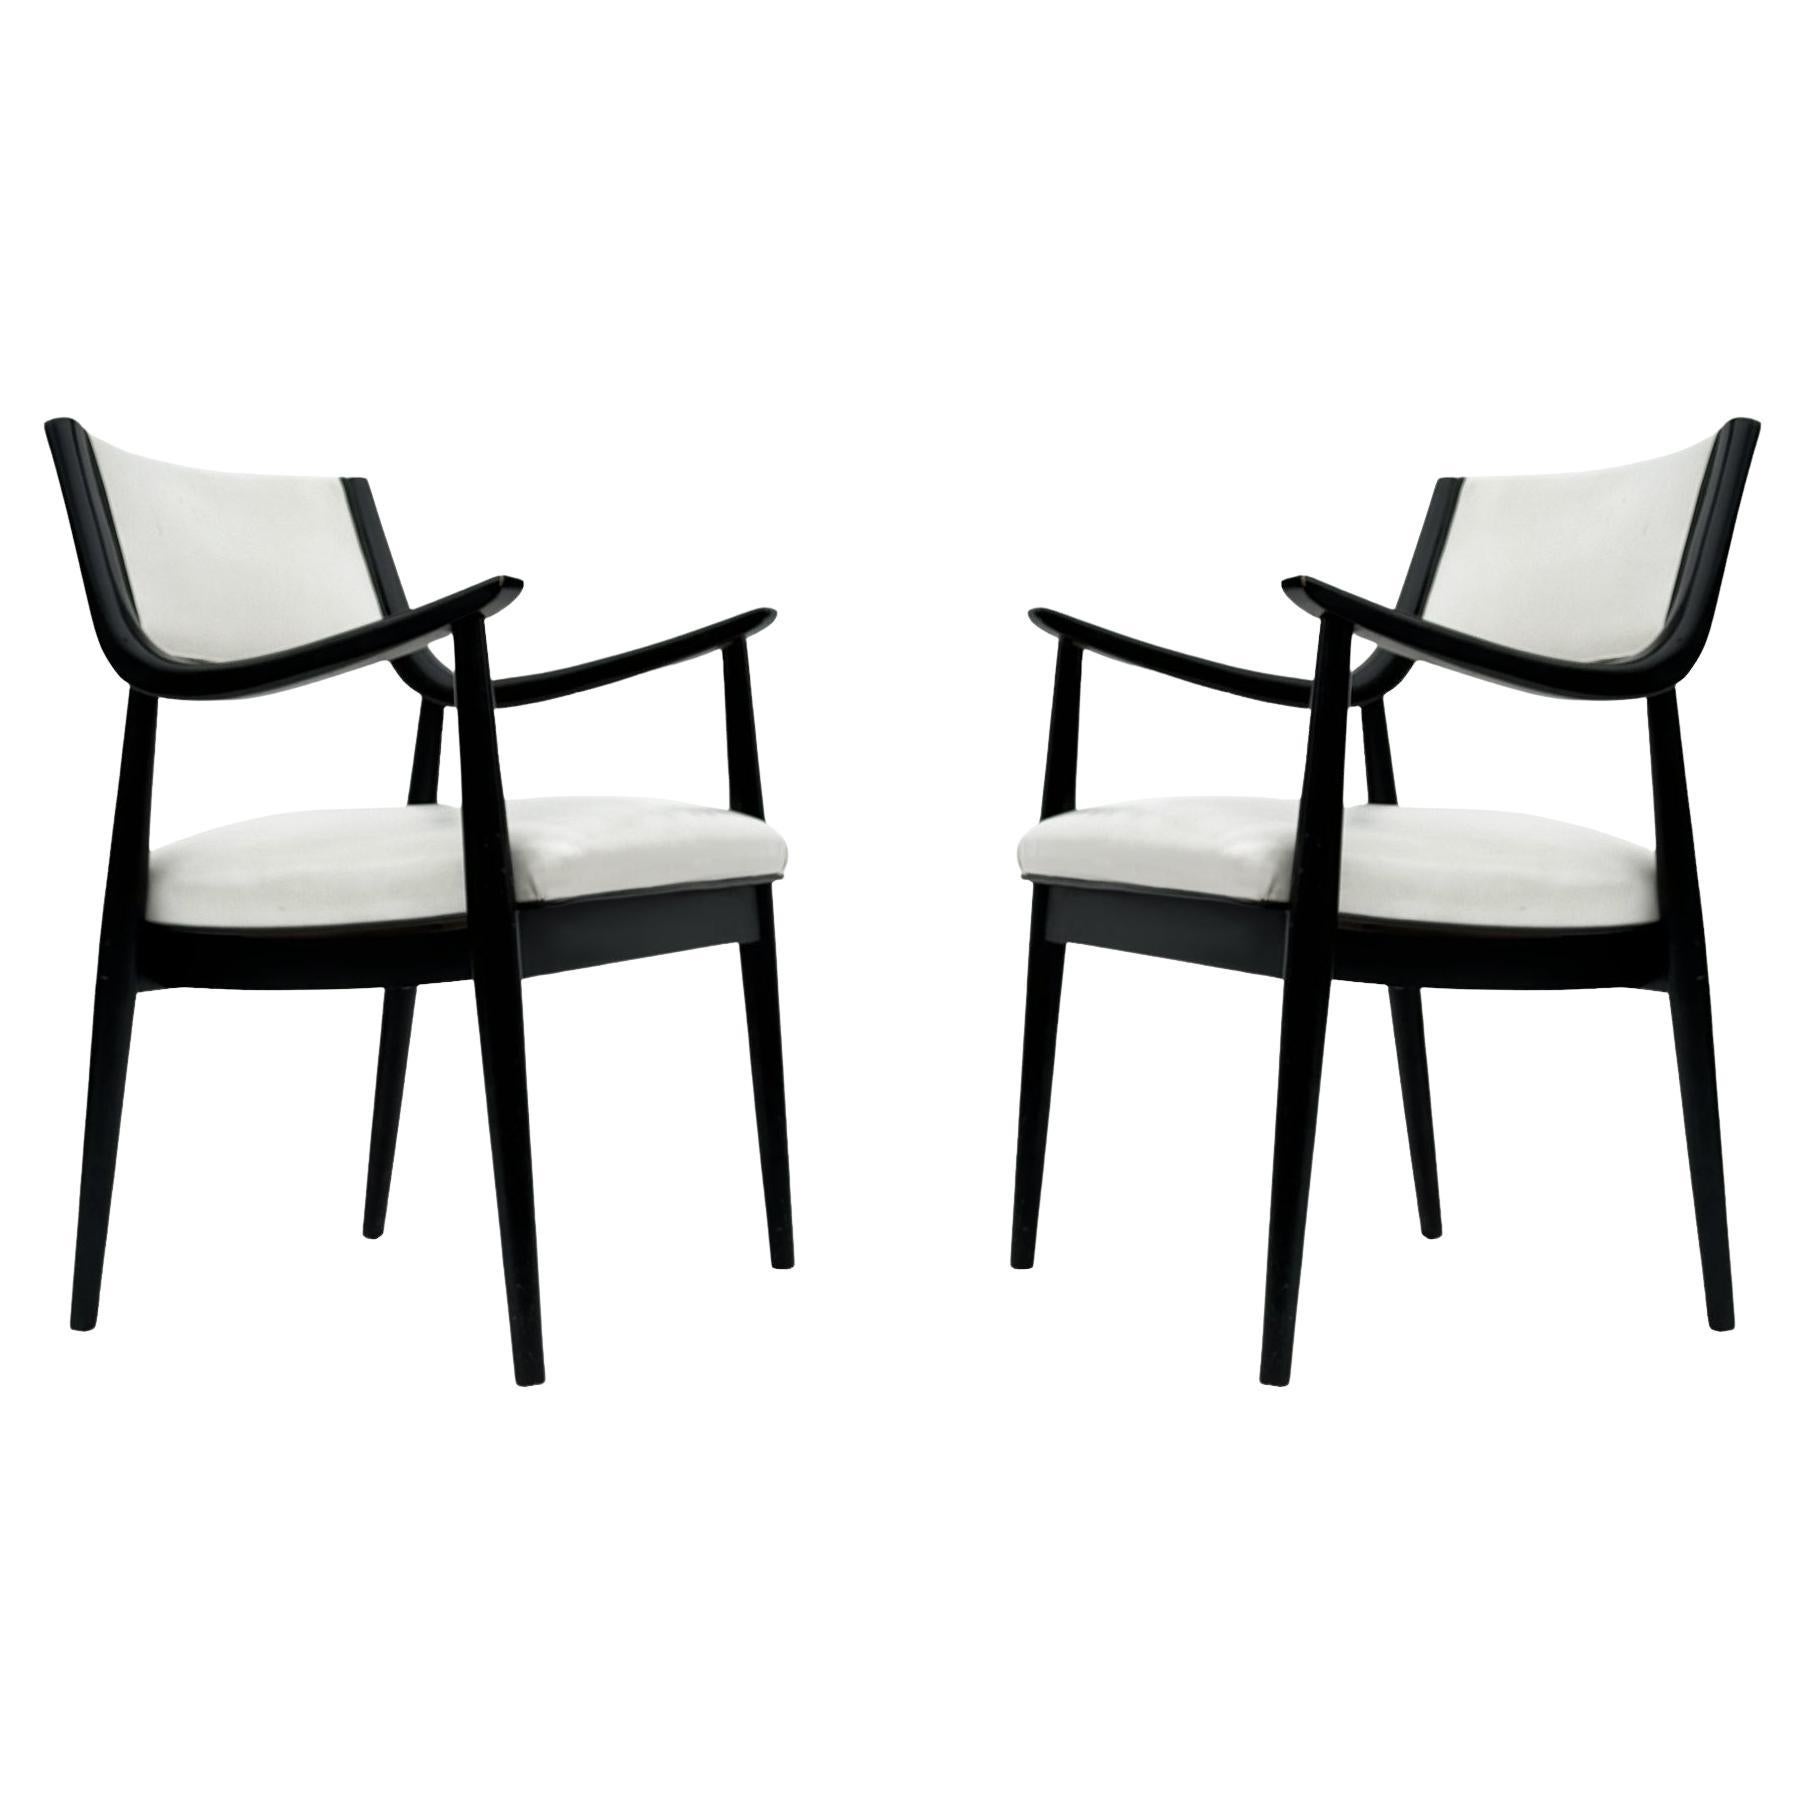 Pair of Mid-Century Modern Black Lacquer Danish Modern Style Armchairs in White